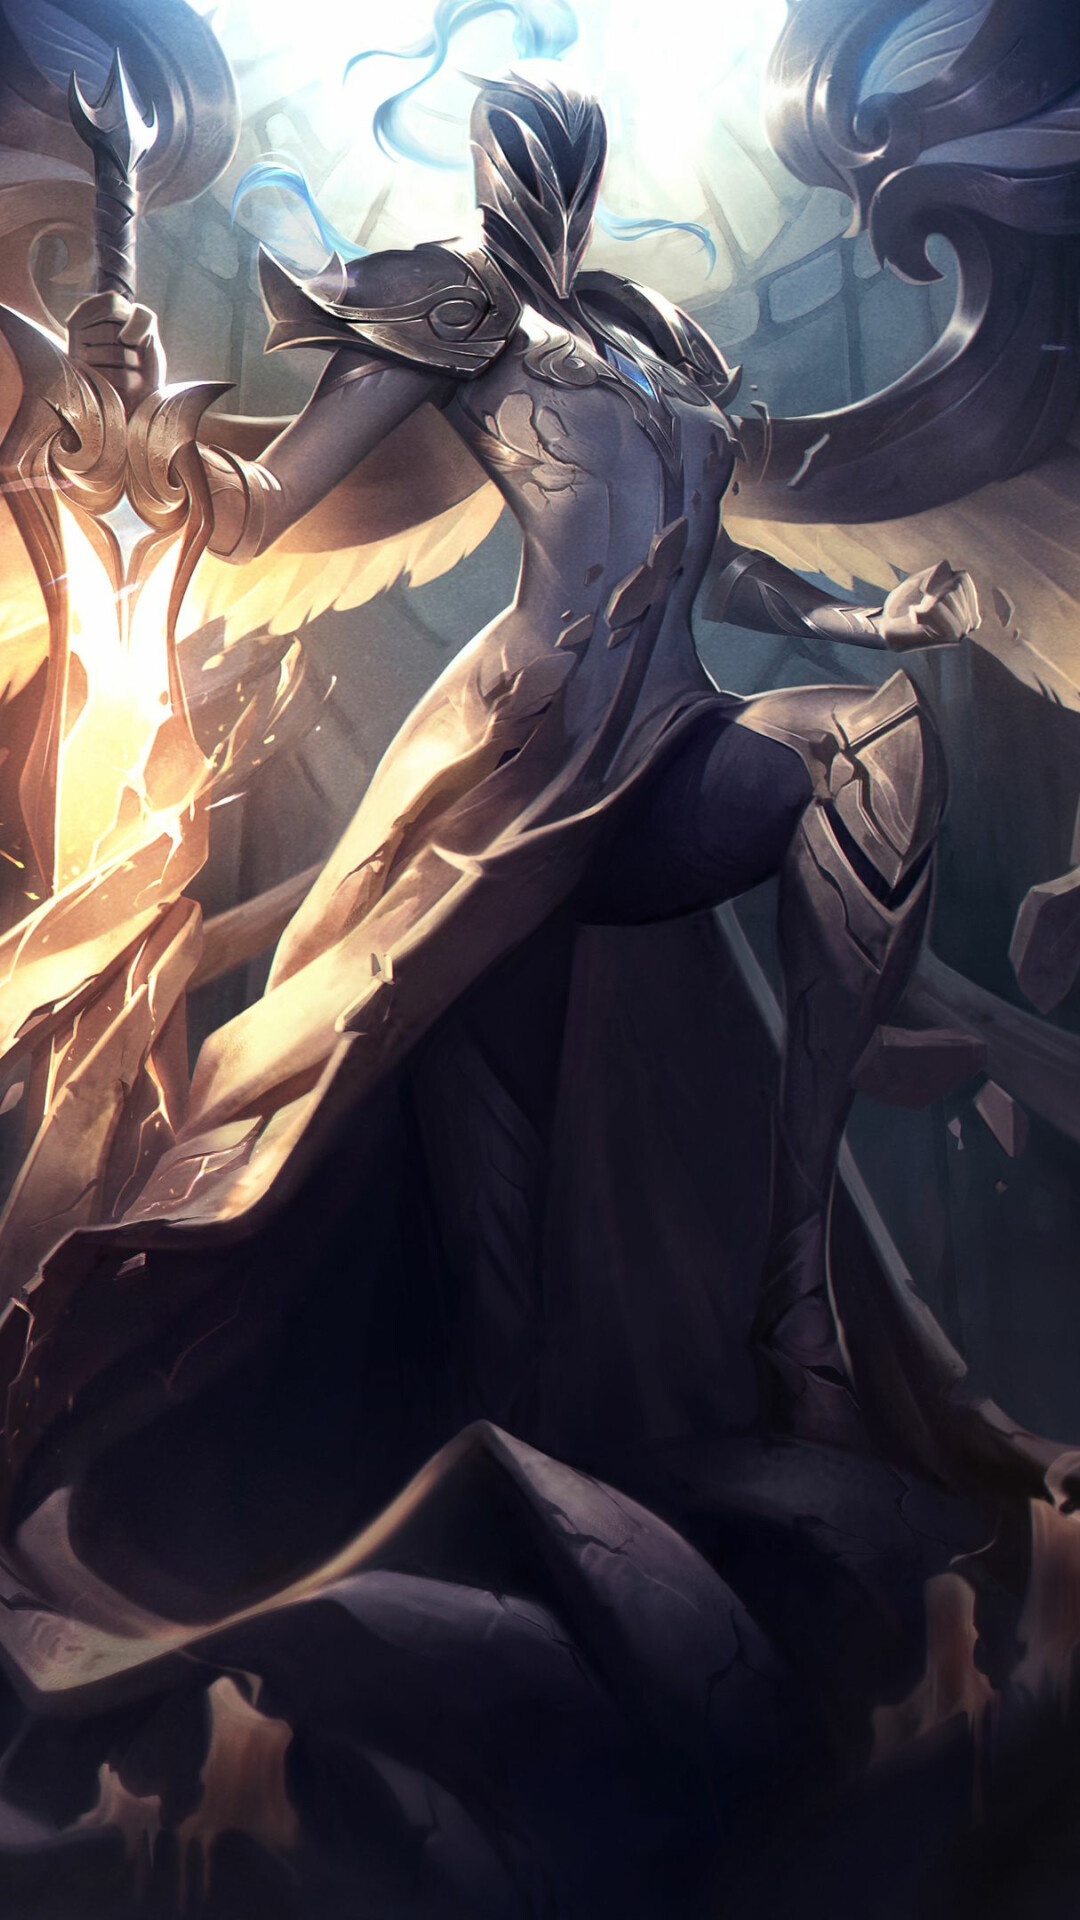 League of Legends: Kayle, the Righteous, Specialist, Riot Games. 1080x1920 Full HD Wallpaper.